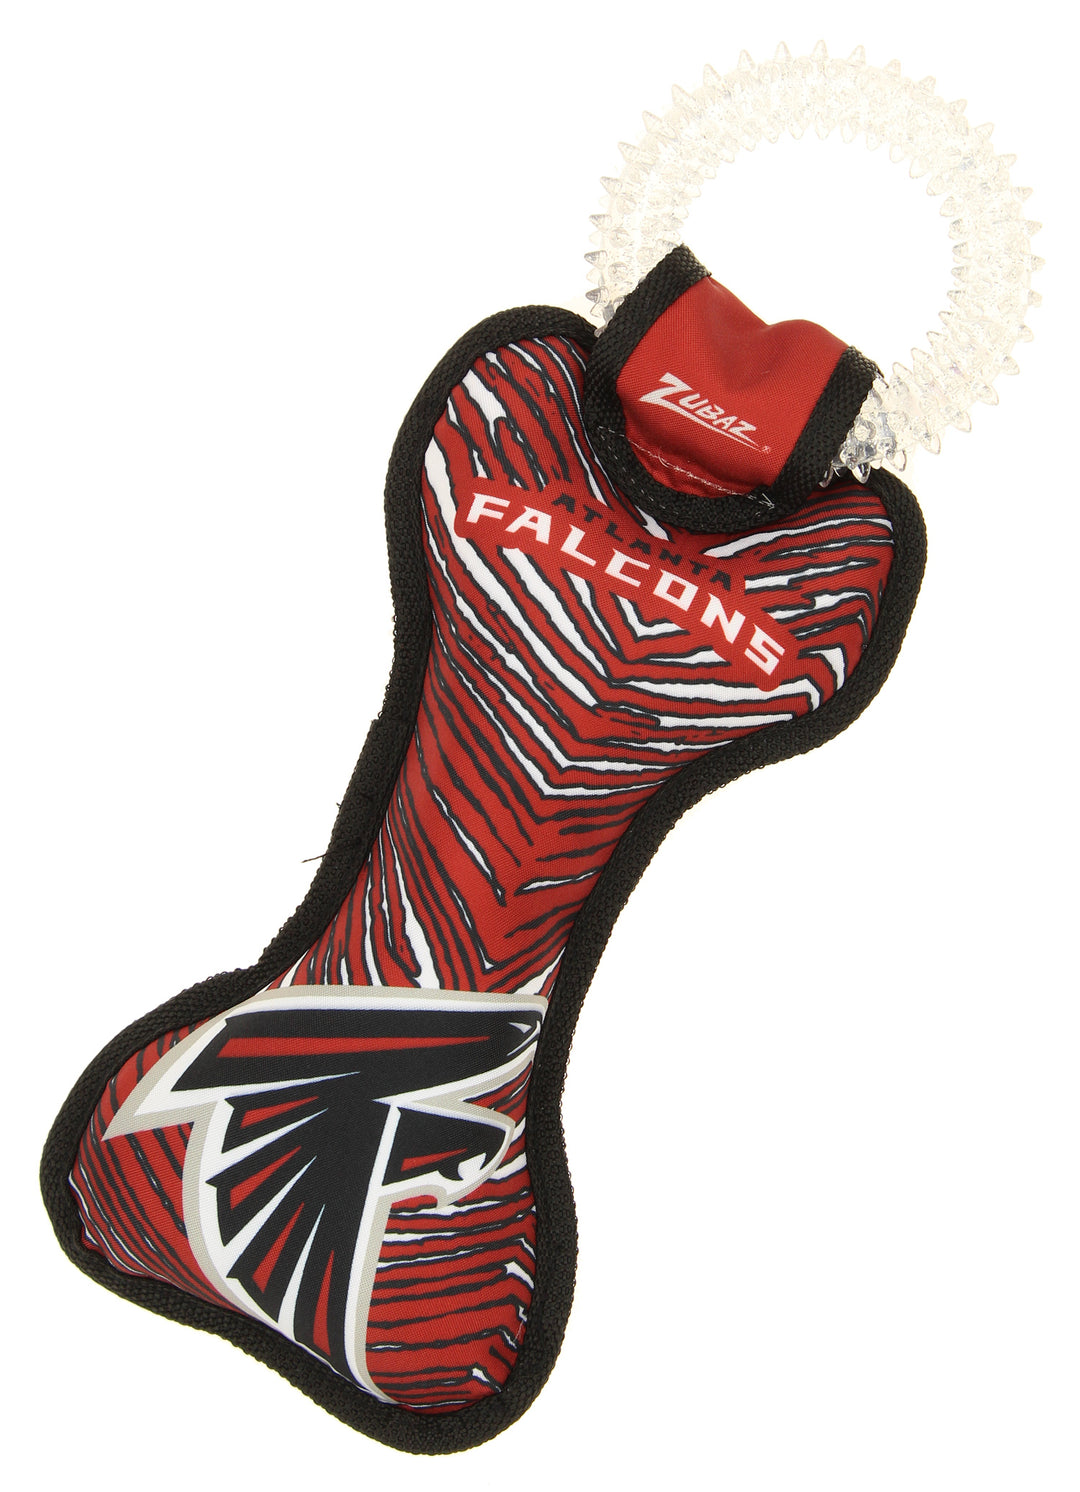 Zubaz X Pets First NFL Atlanta Falcons Team Ring Tug Toy for Dogs